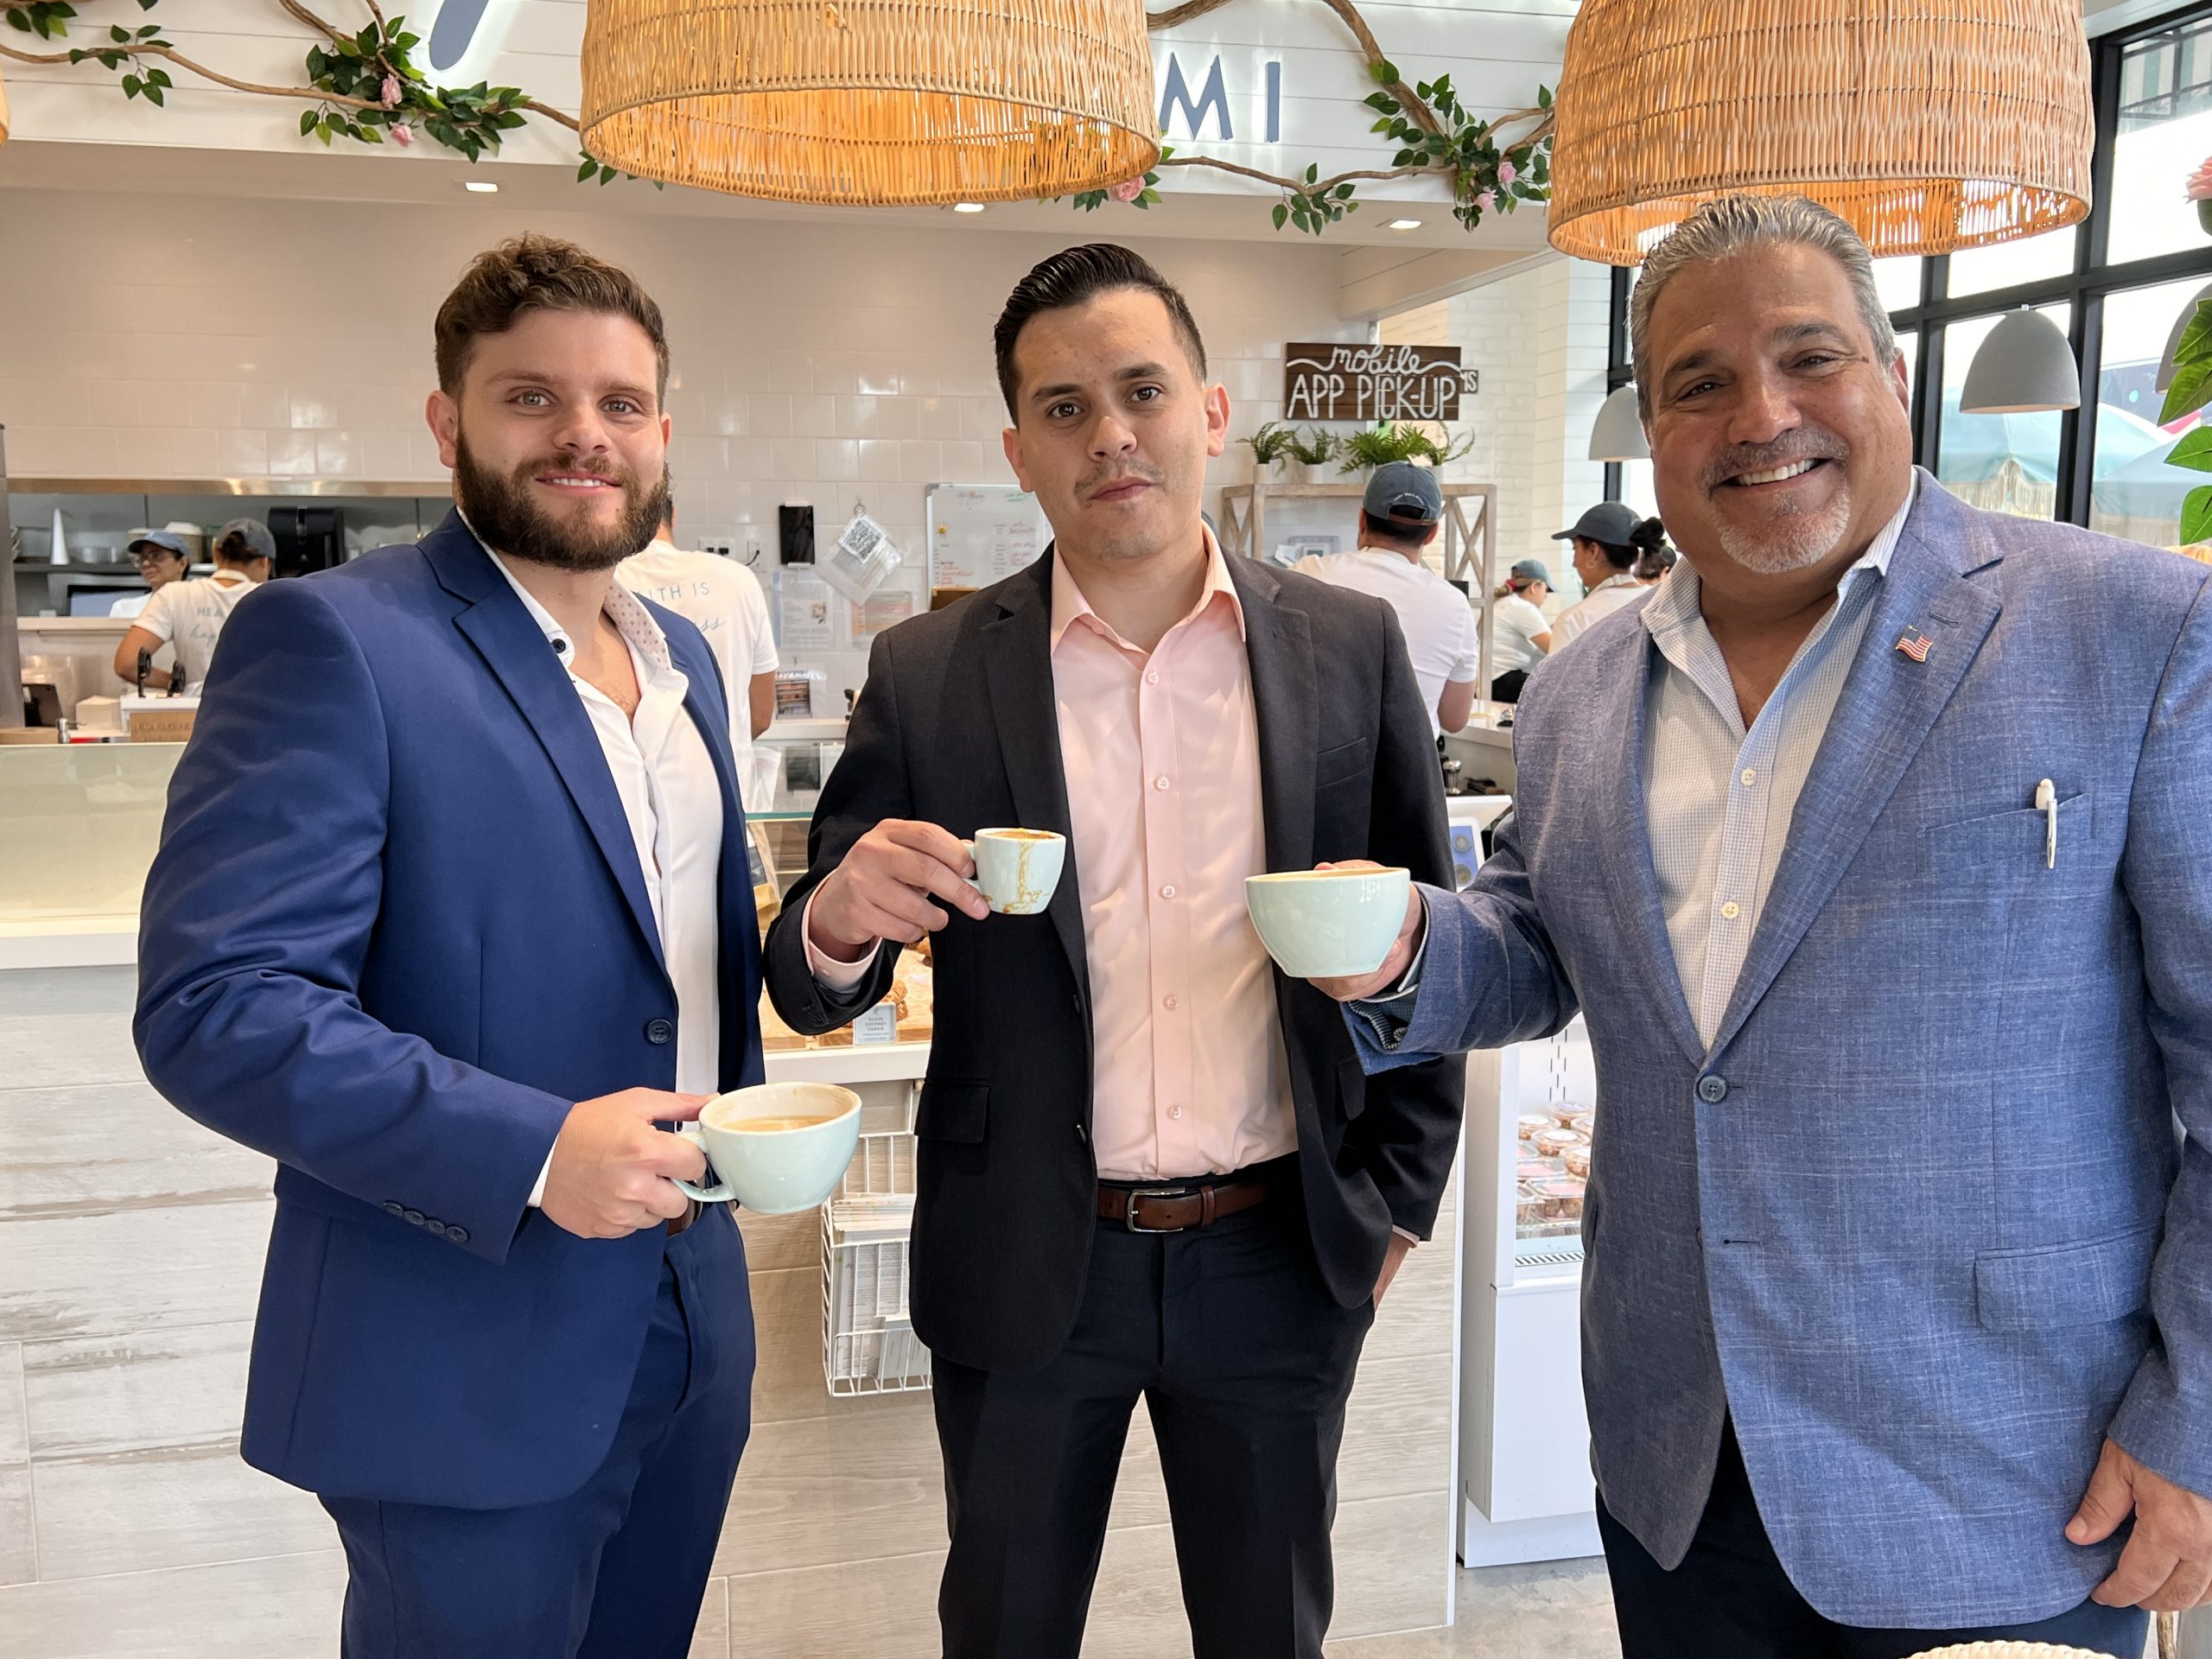 Pura Vida Doral Hosts Successful Breakfast Event for Doral Chamber of Commerce VIPs